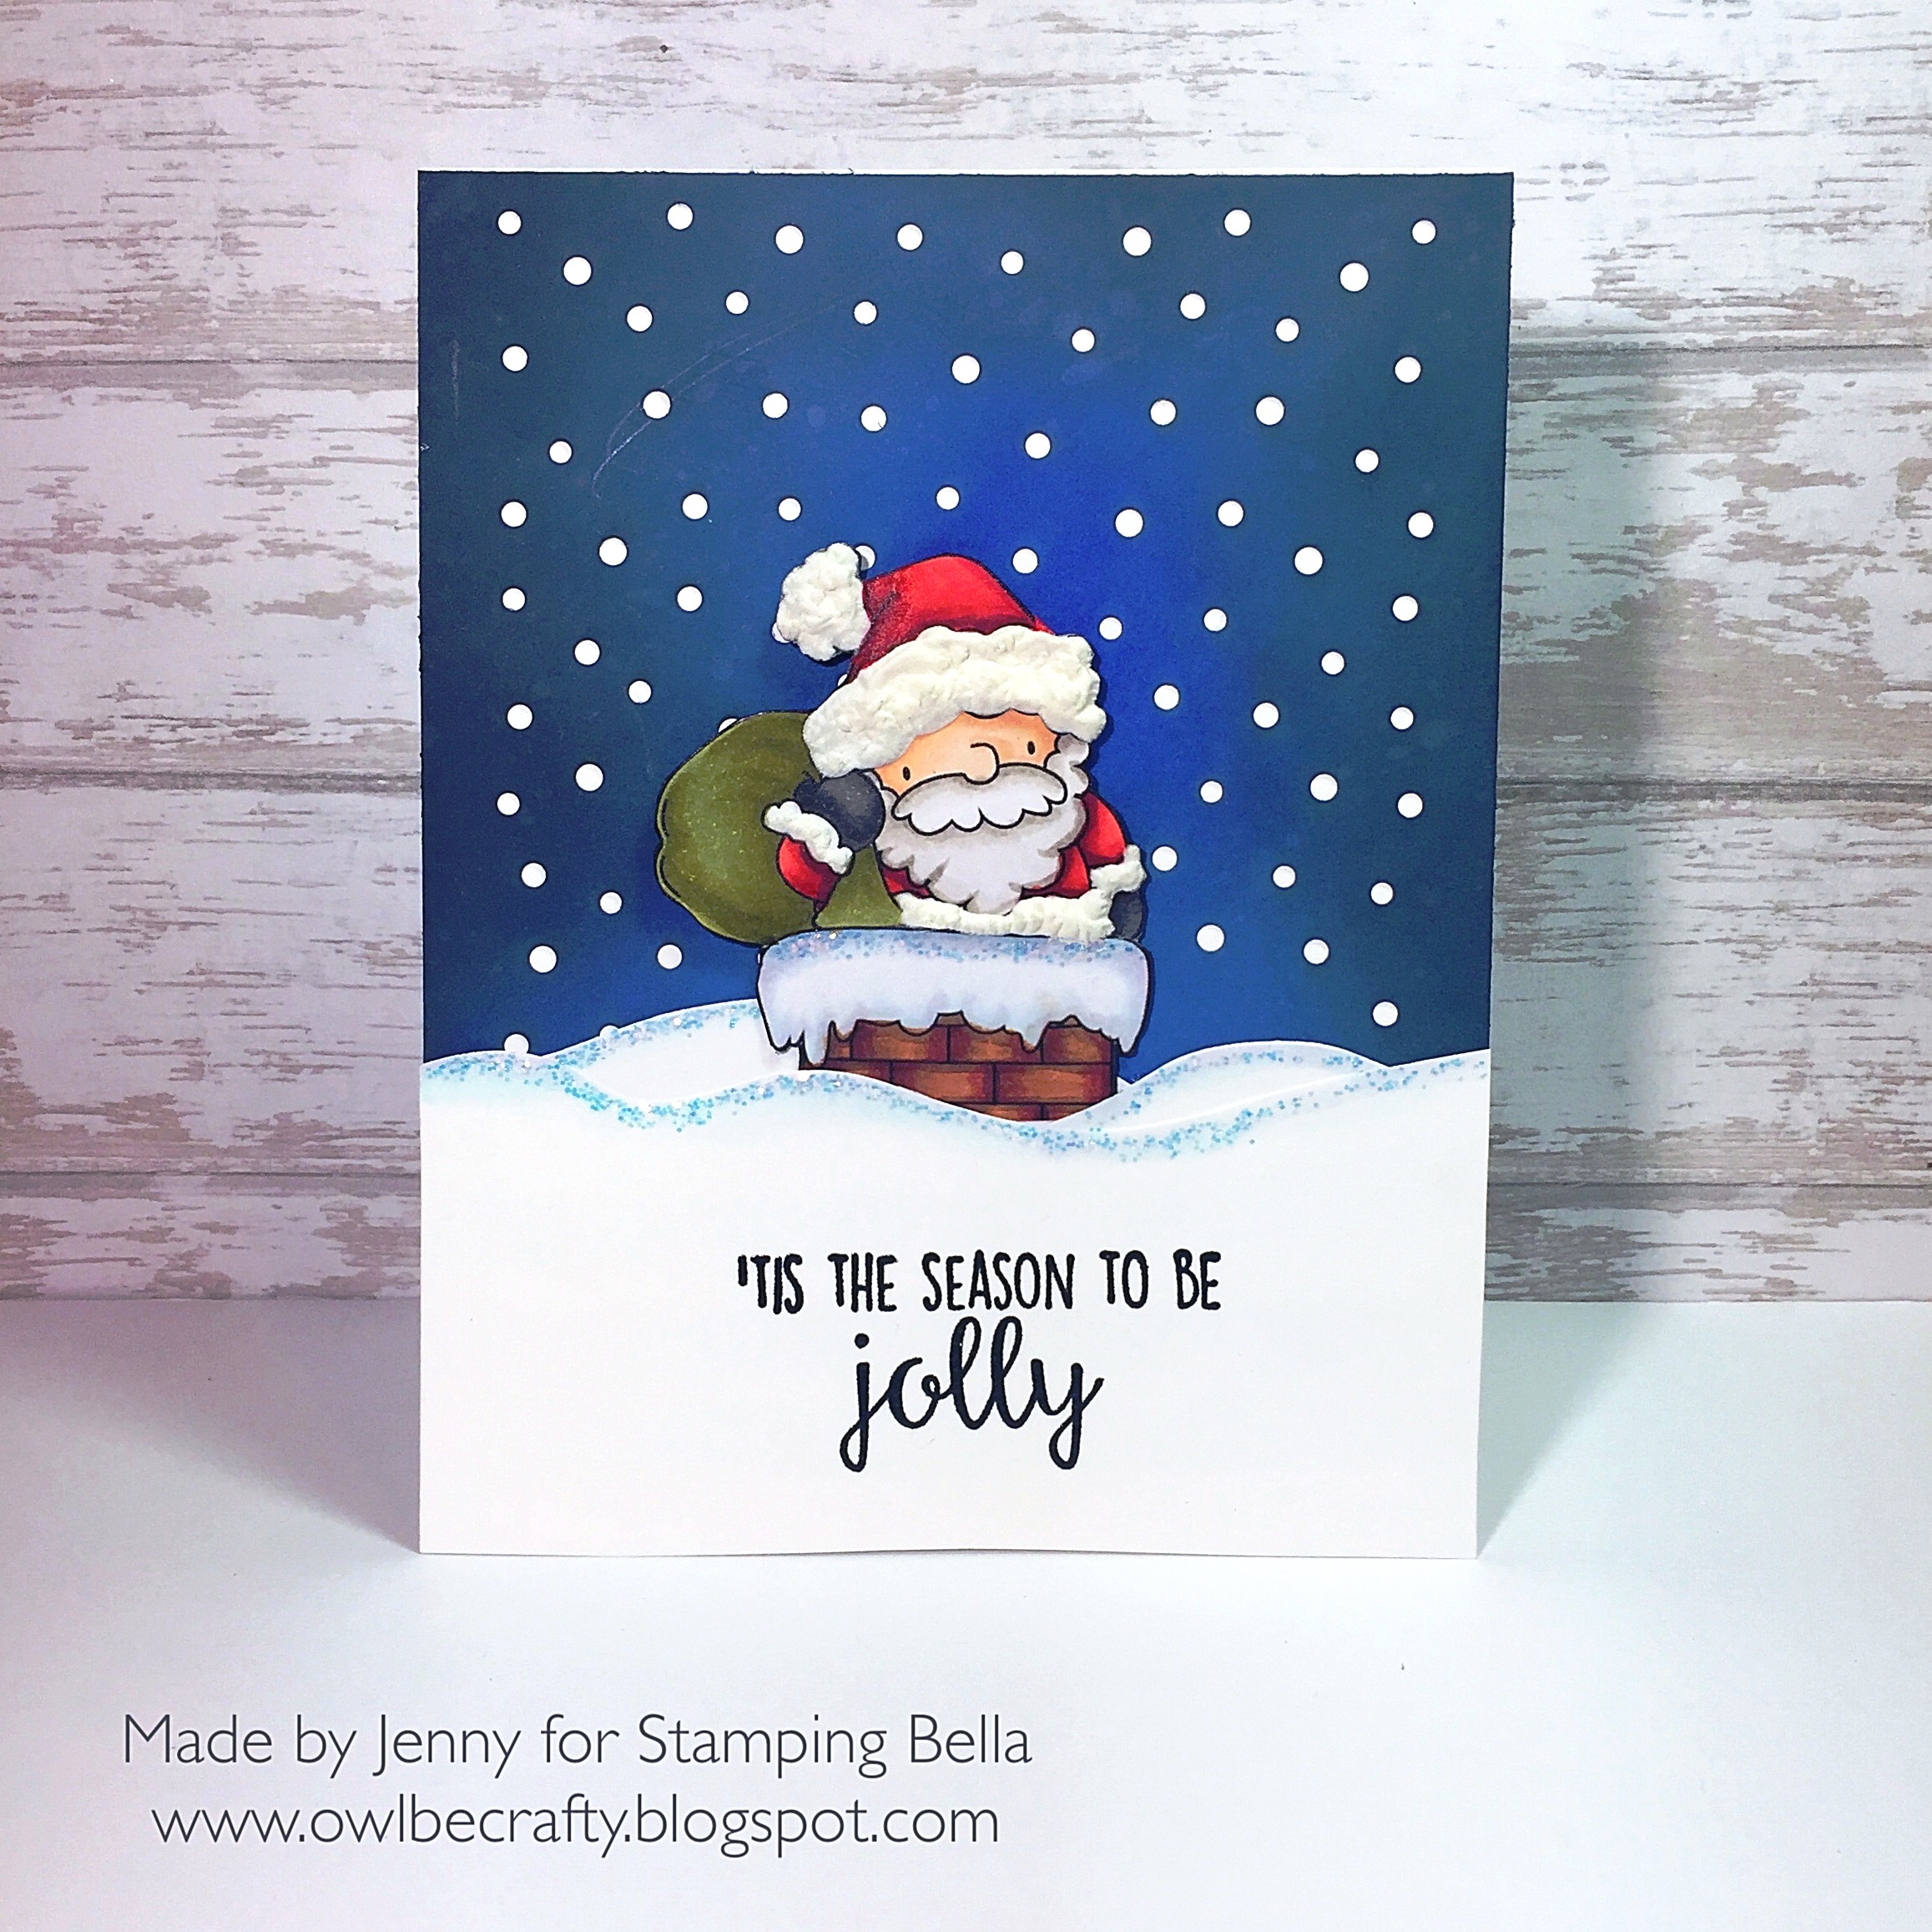 Stamping Bella Rubber stamp: LITTLE BITS SANTA AND HIS CHIMNEY card by JENNY Bordeaux